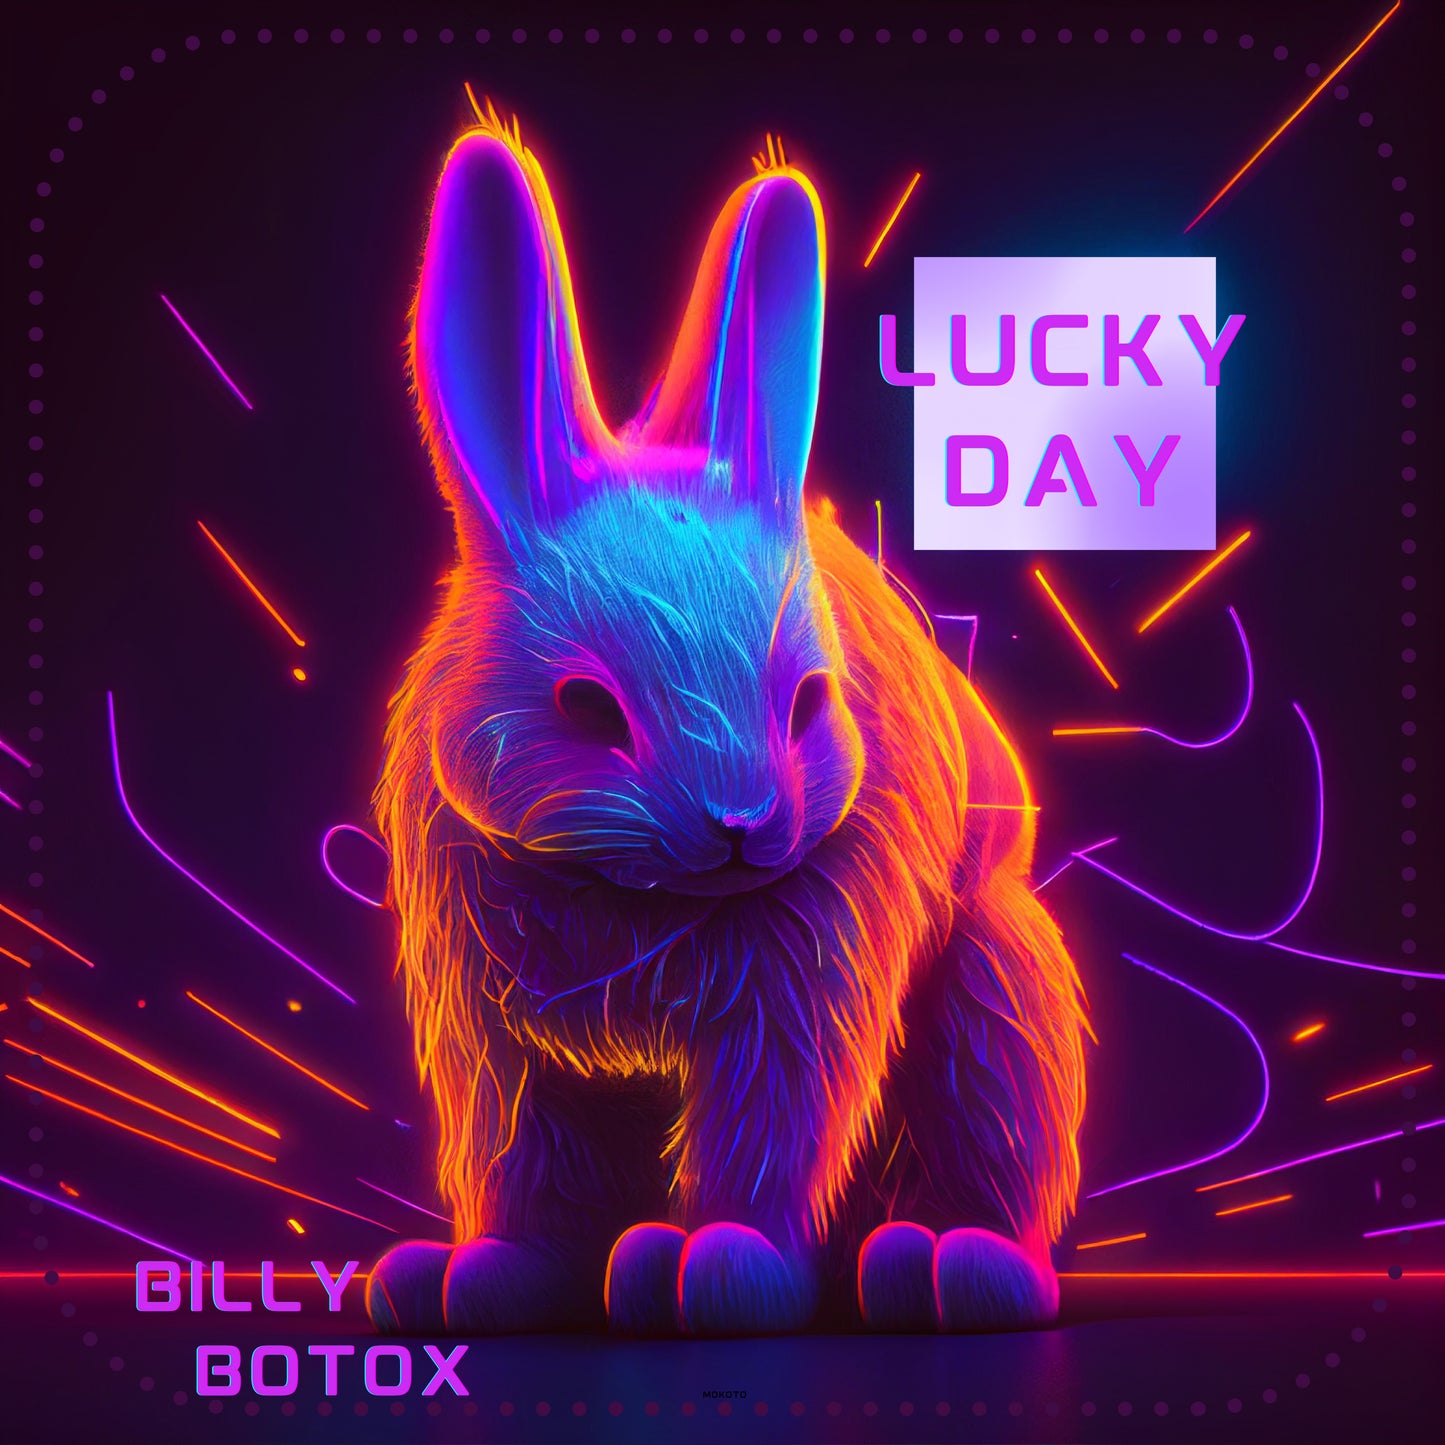 Billy Botox - Single - Lucky Day (Hi-Res Download)